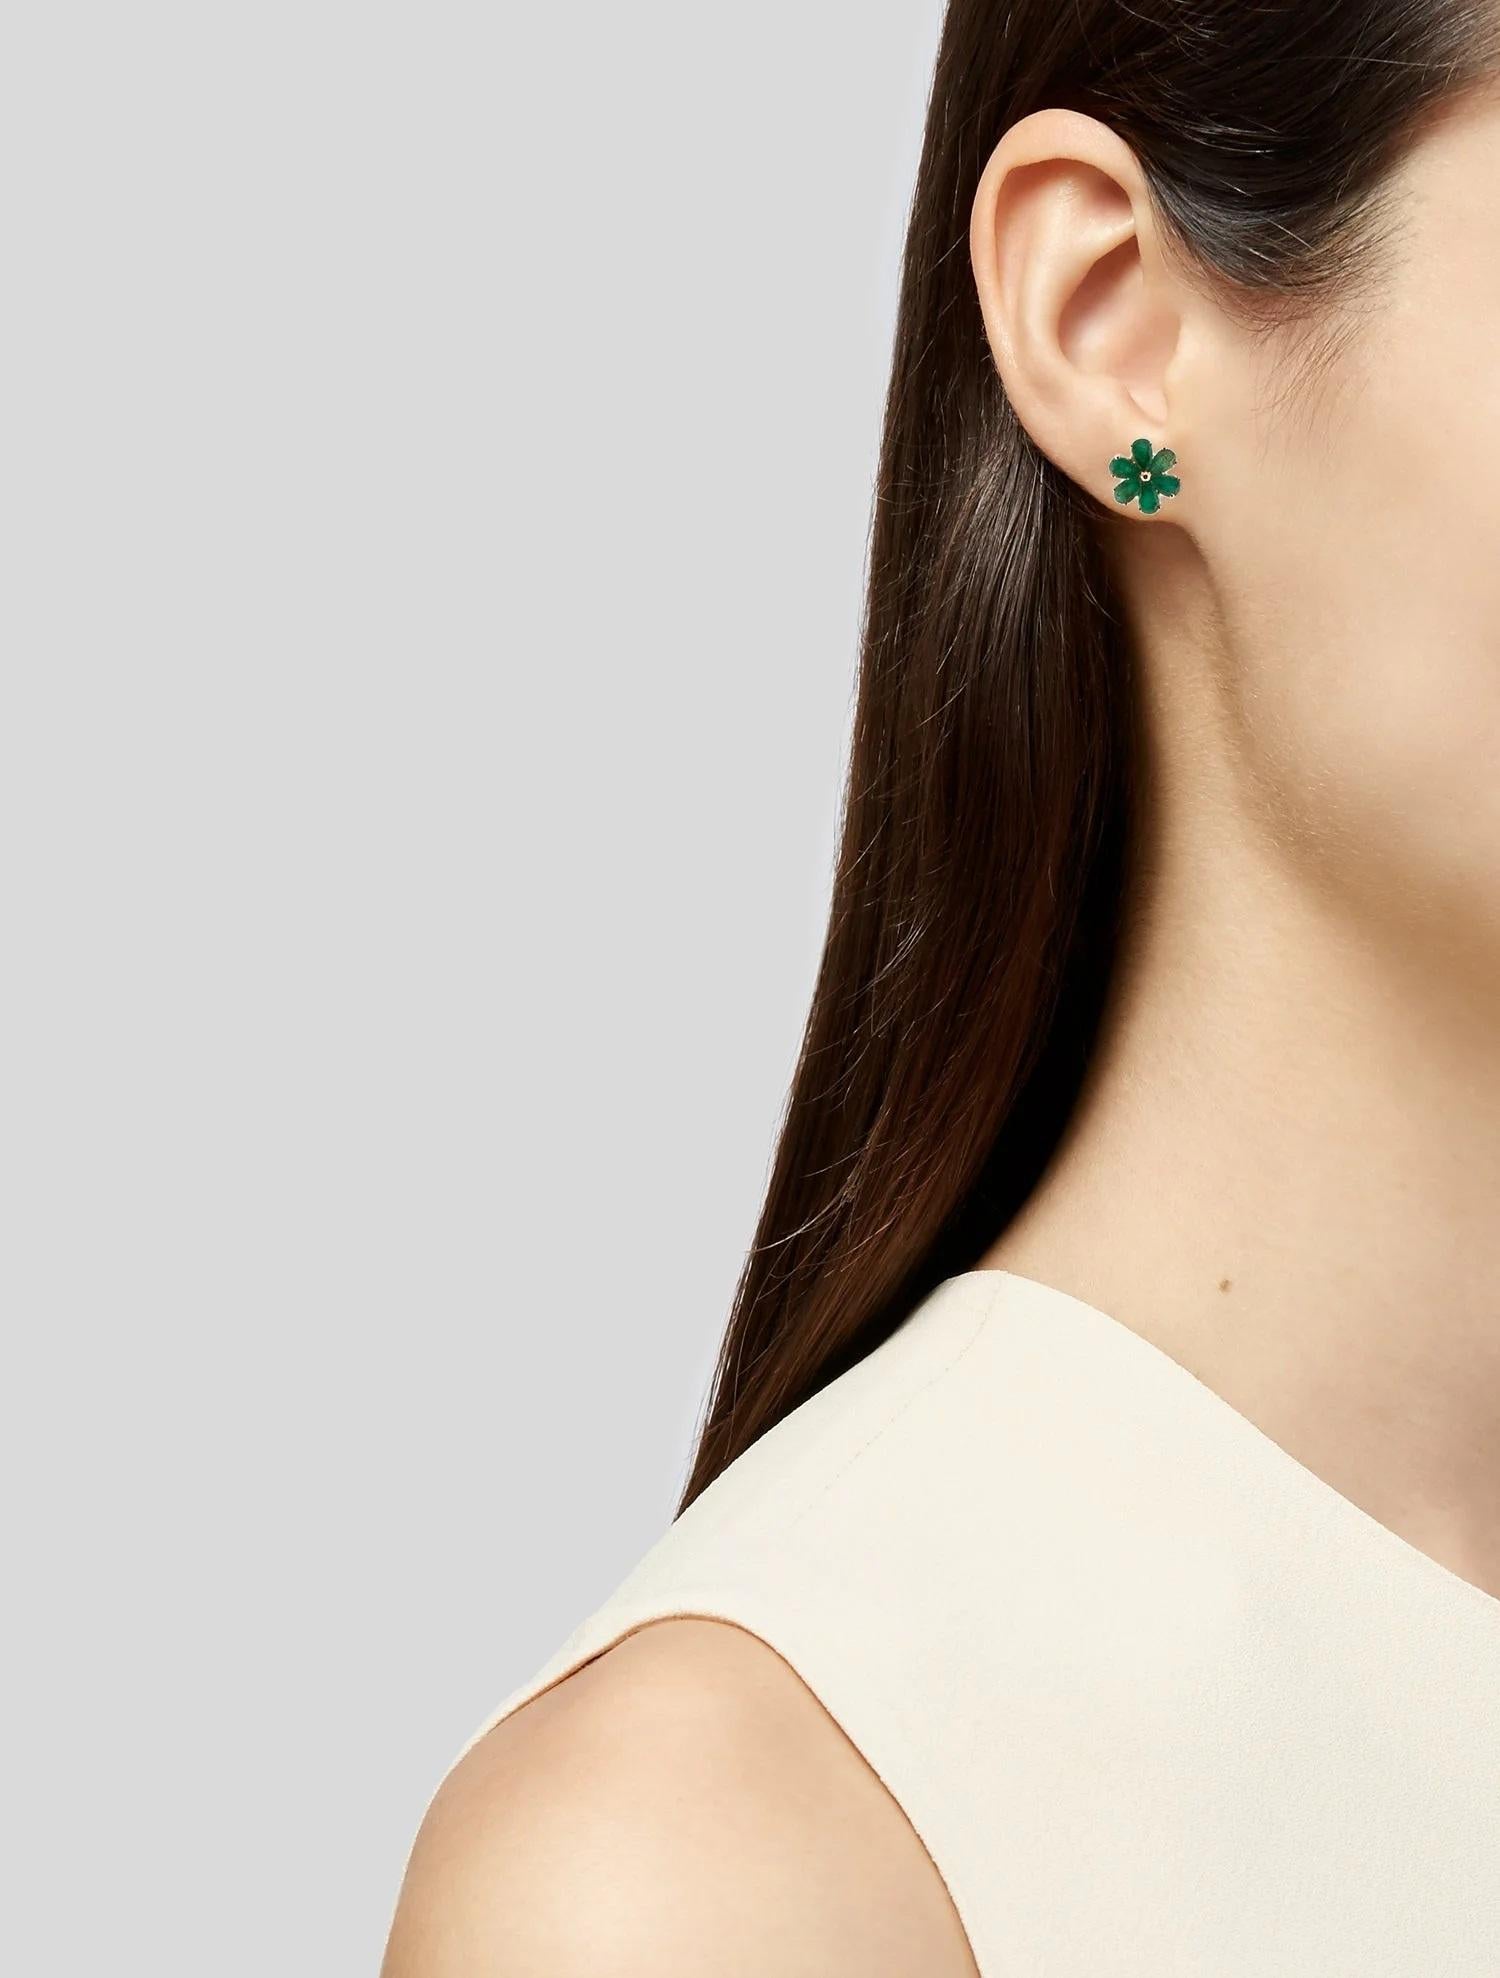 Illuminate your style with these exquisite 14K Yellow Gold Emerald Flower Stud Earrings, featuring mesmerizing 2.36 Carat Pear Shaped Emeralds. Crafted with precision, each earring boasts a floral-inspired design, radiating elegance and charm. The